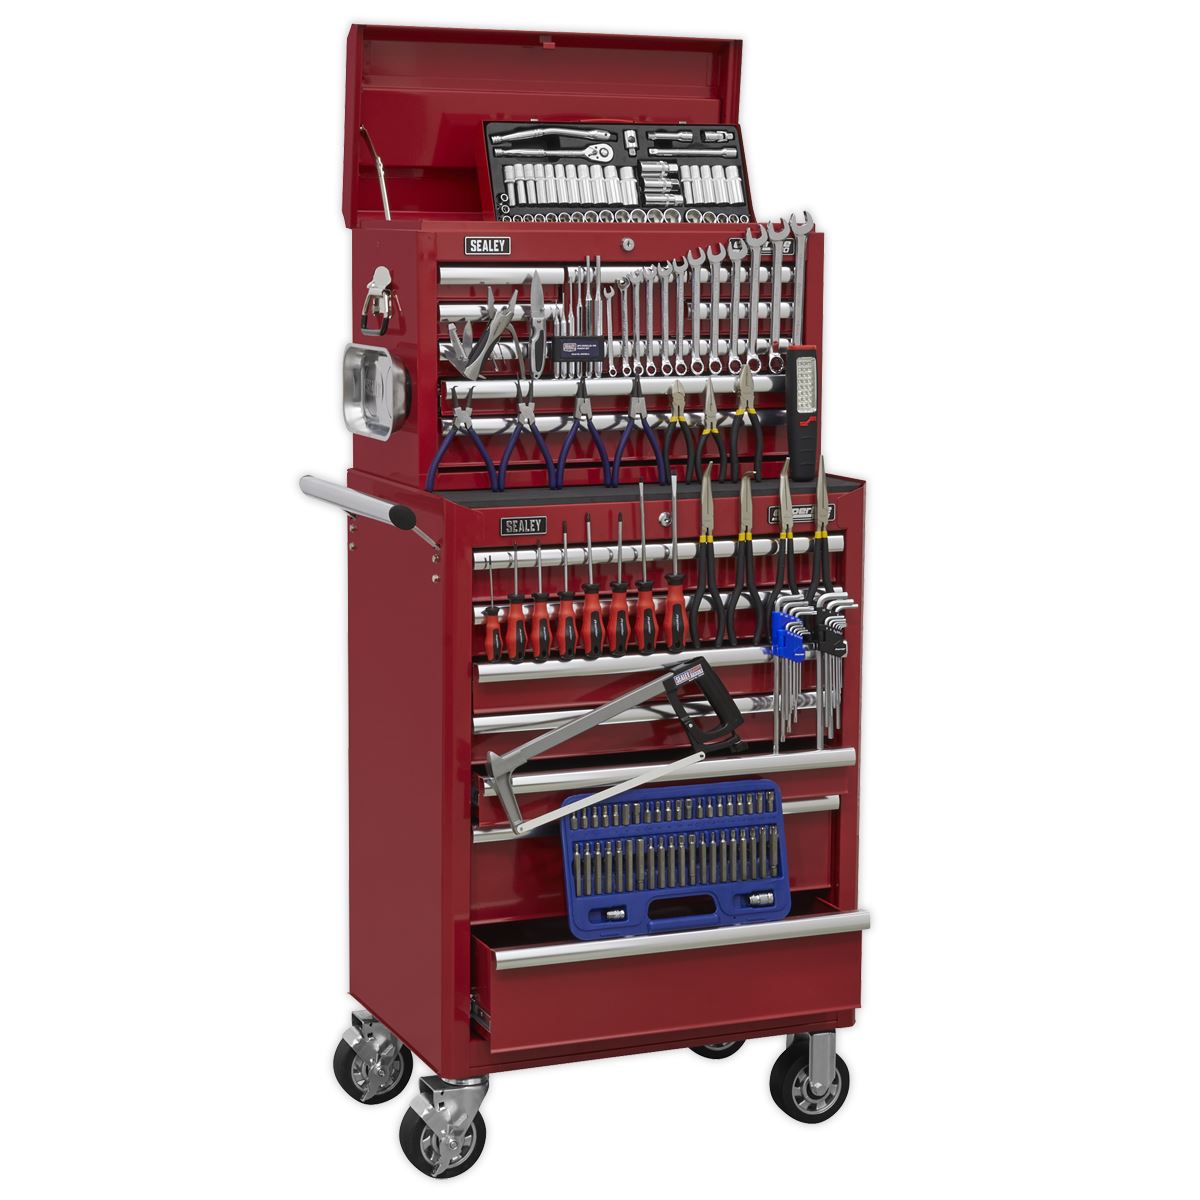 Sealey Superline Pro Topchest & Rollcab Combination 15 Drawer with Ball-Bearing Slides - Red & 147pc Tool Kit